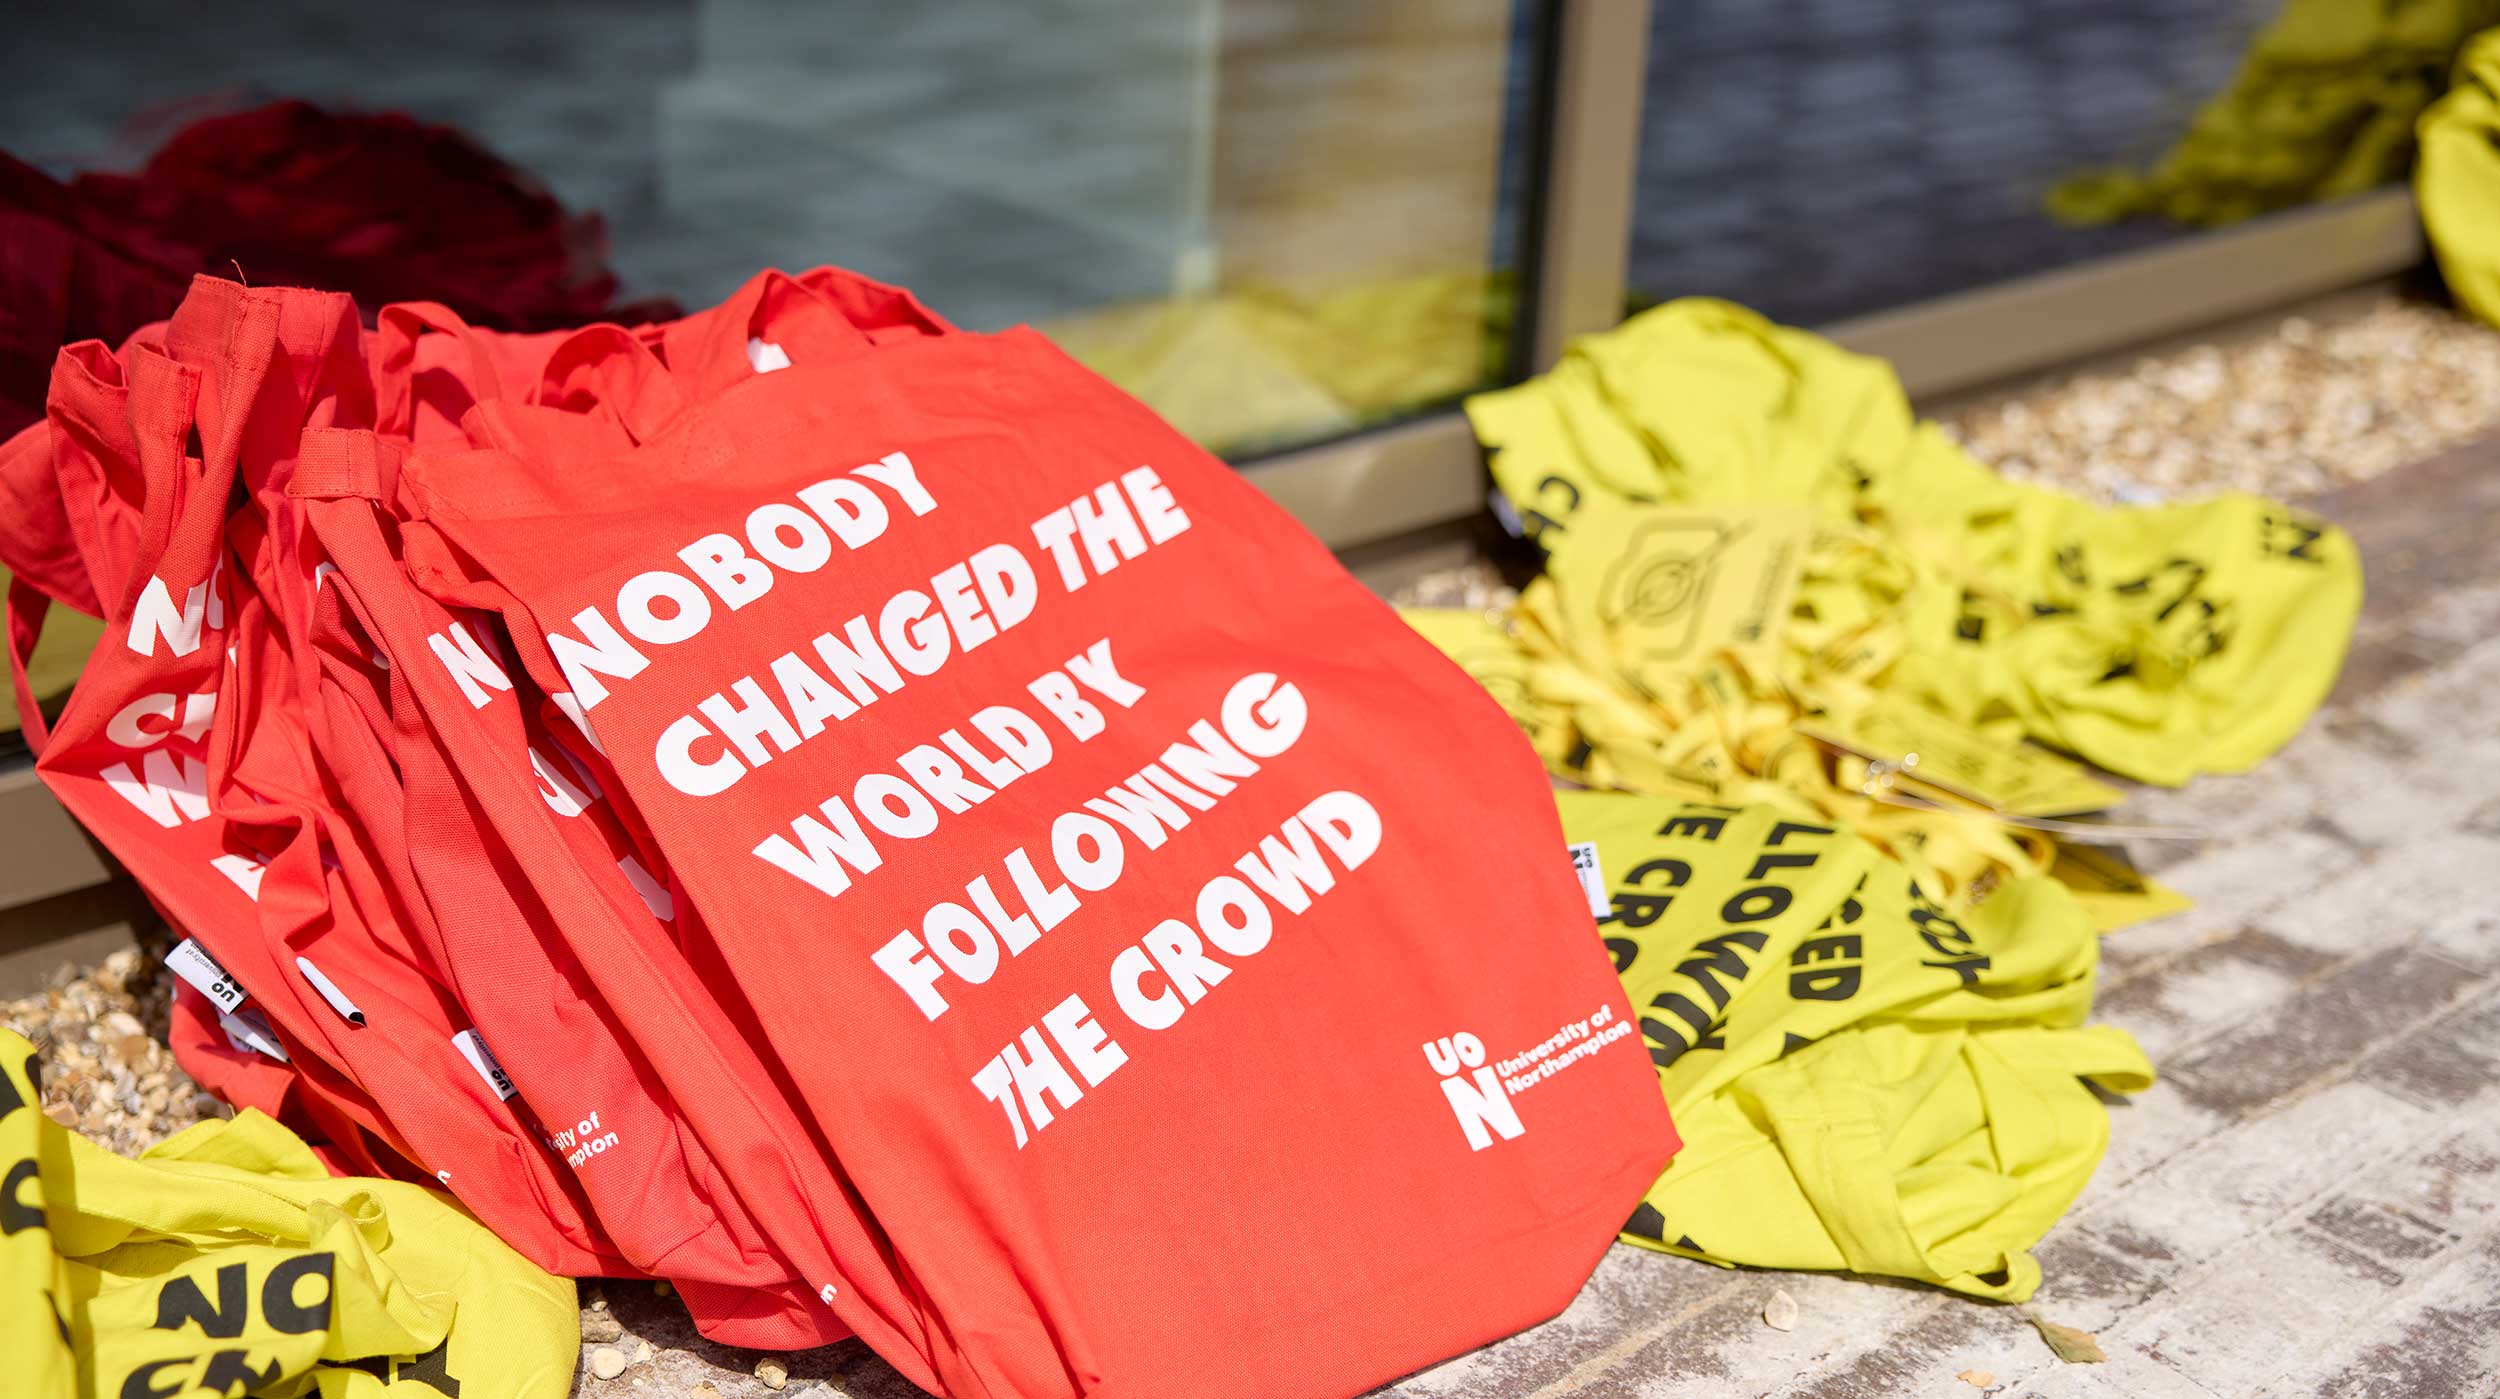 Red cotton tote bags are stacked ready to be handed out to visitors at an open day at the University of Northampton. The bags are printed with the words 'Nobody changed the world by following the crowd'